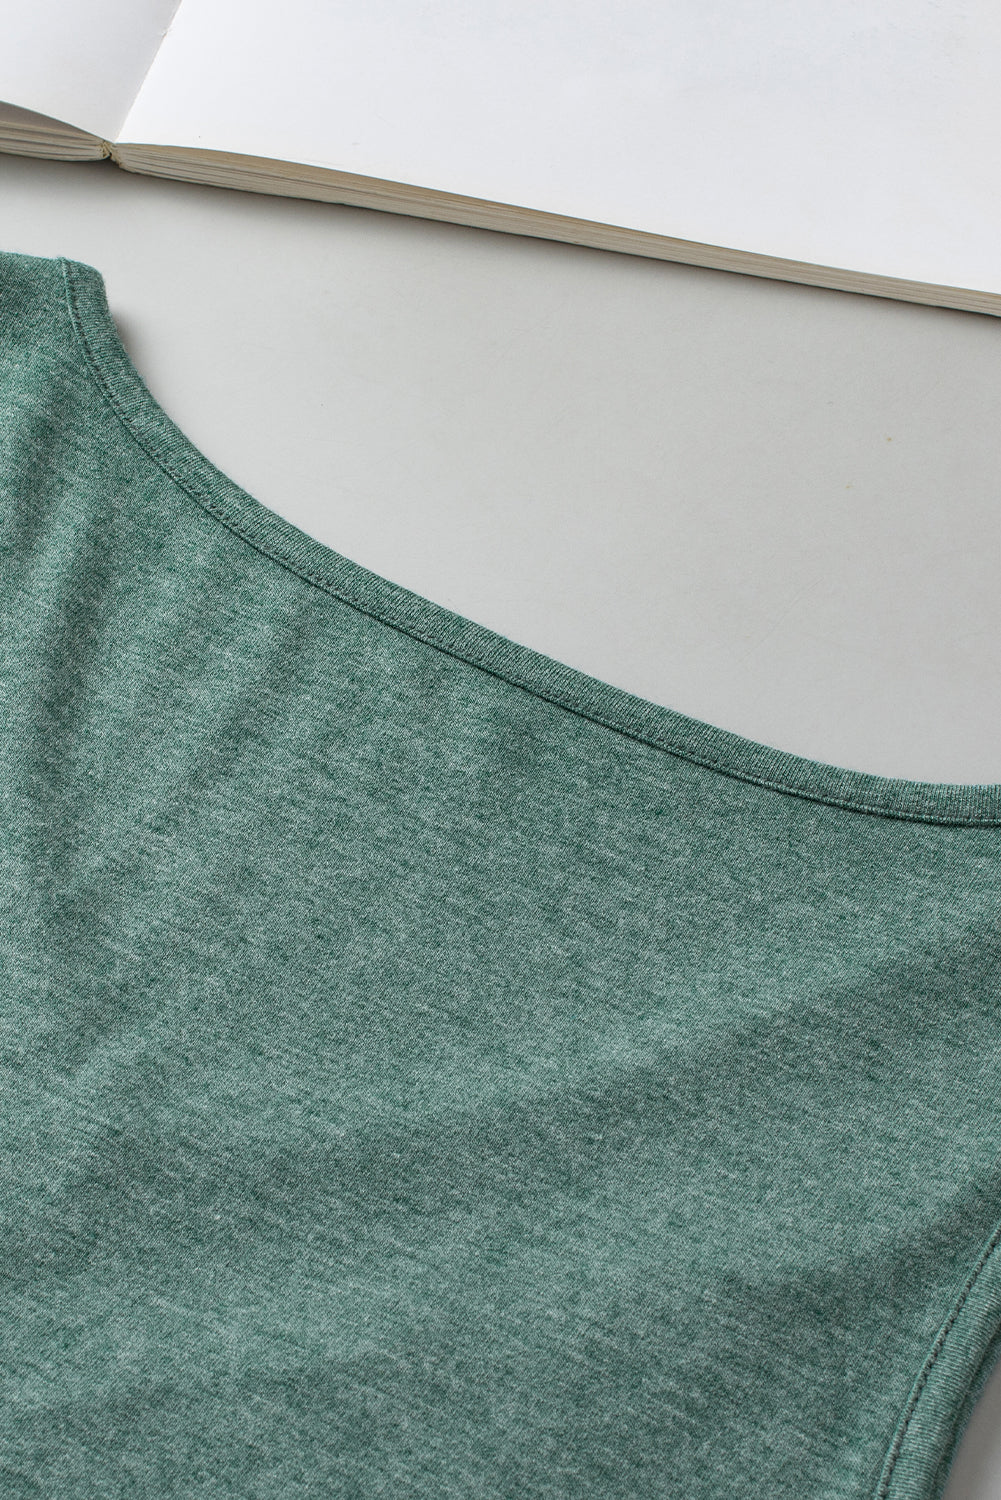 Mist Green Solid Color V Neck Pleated Tank Top